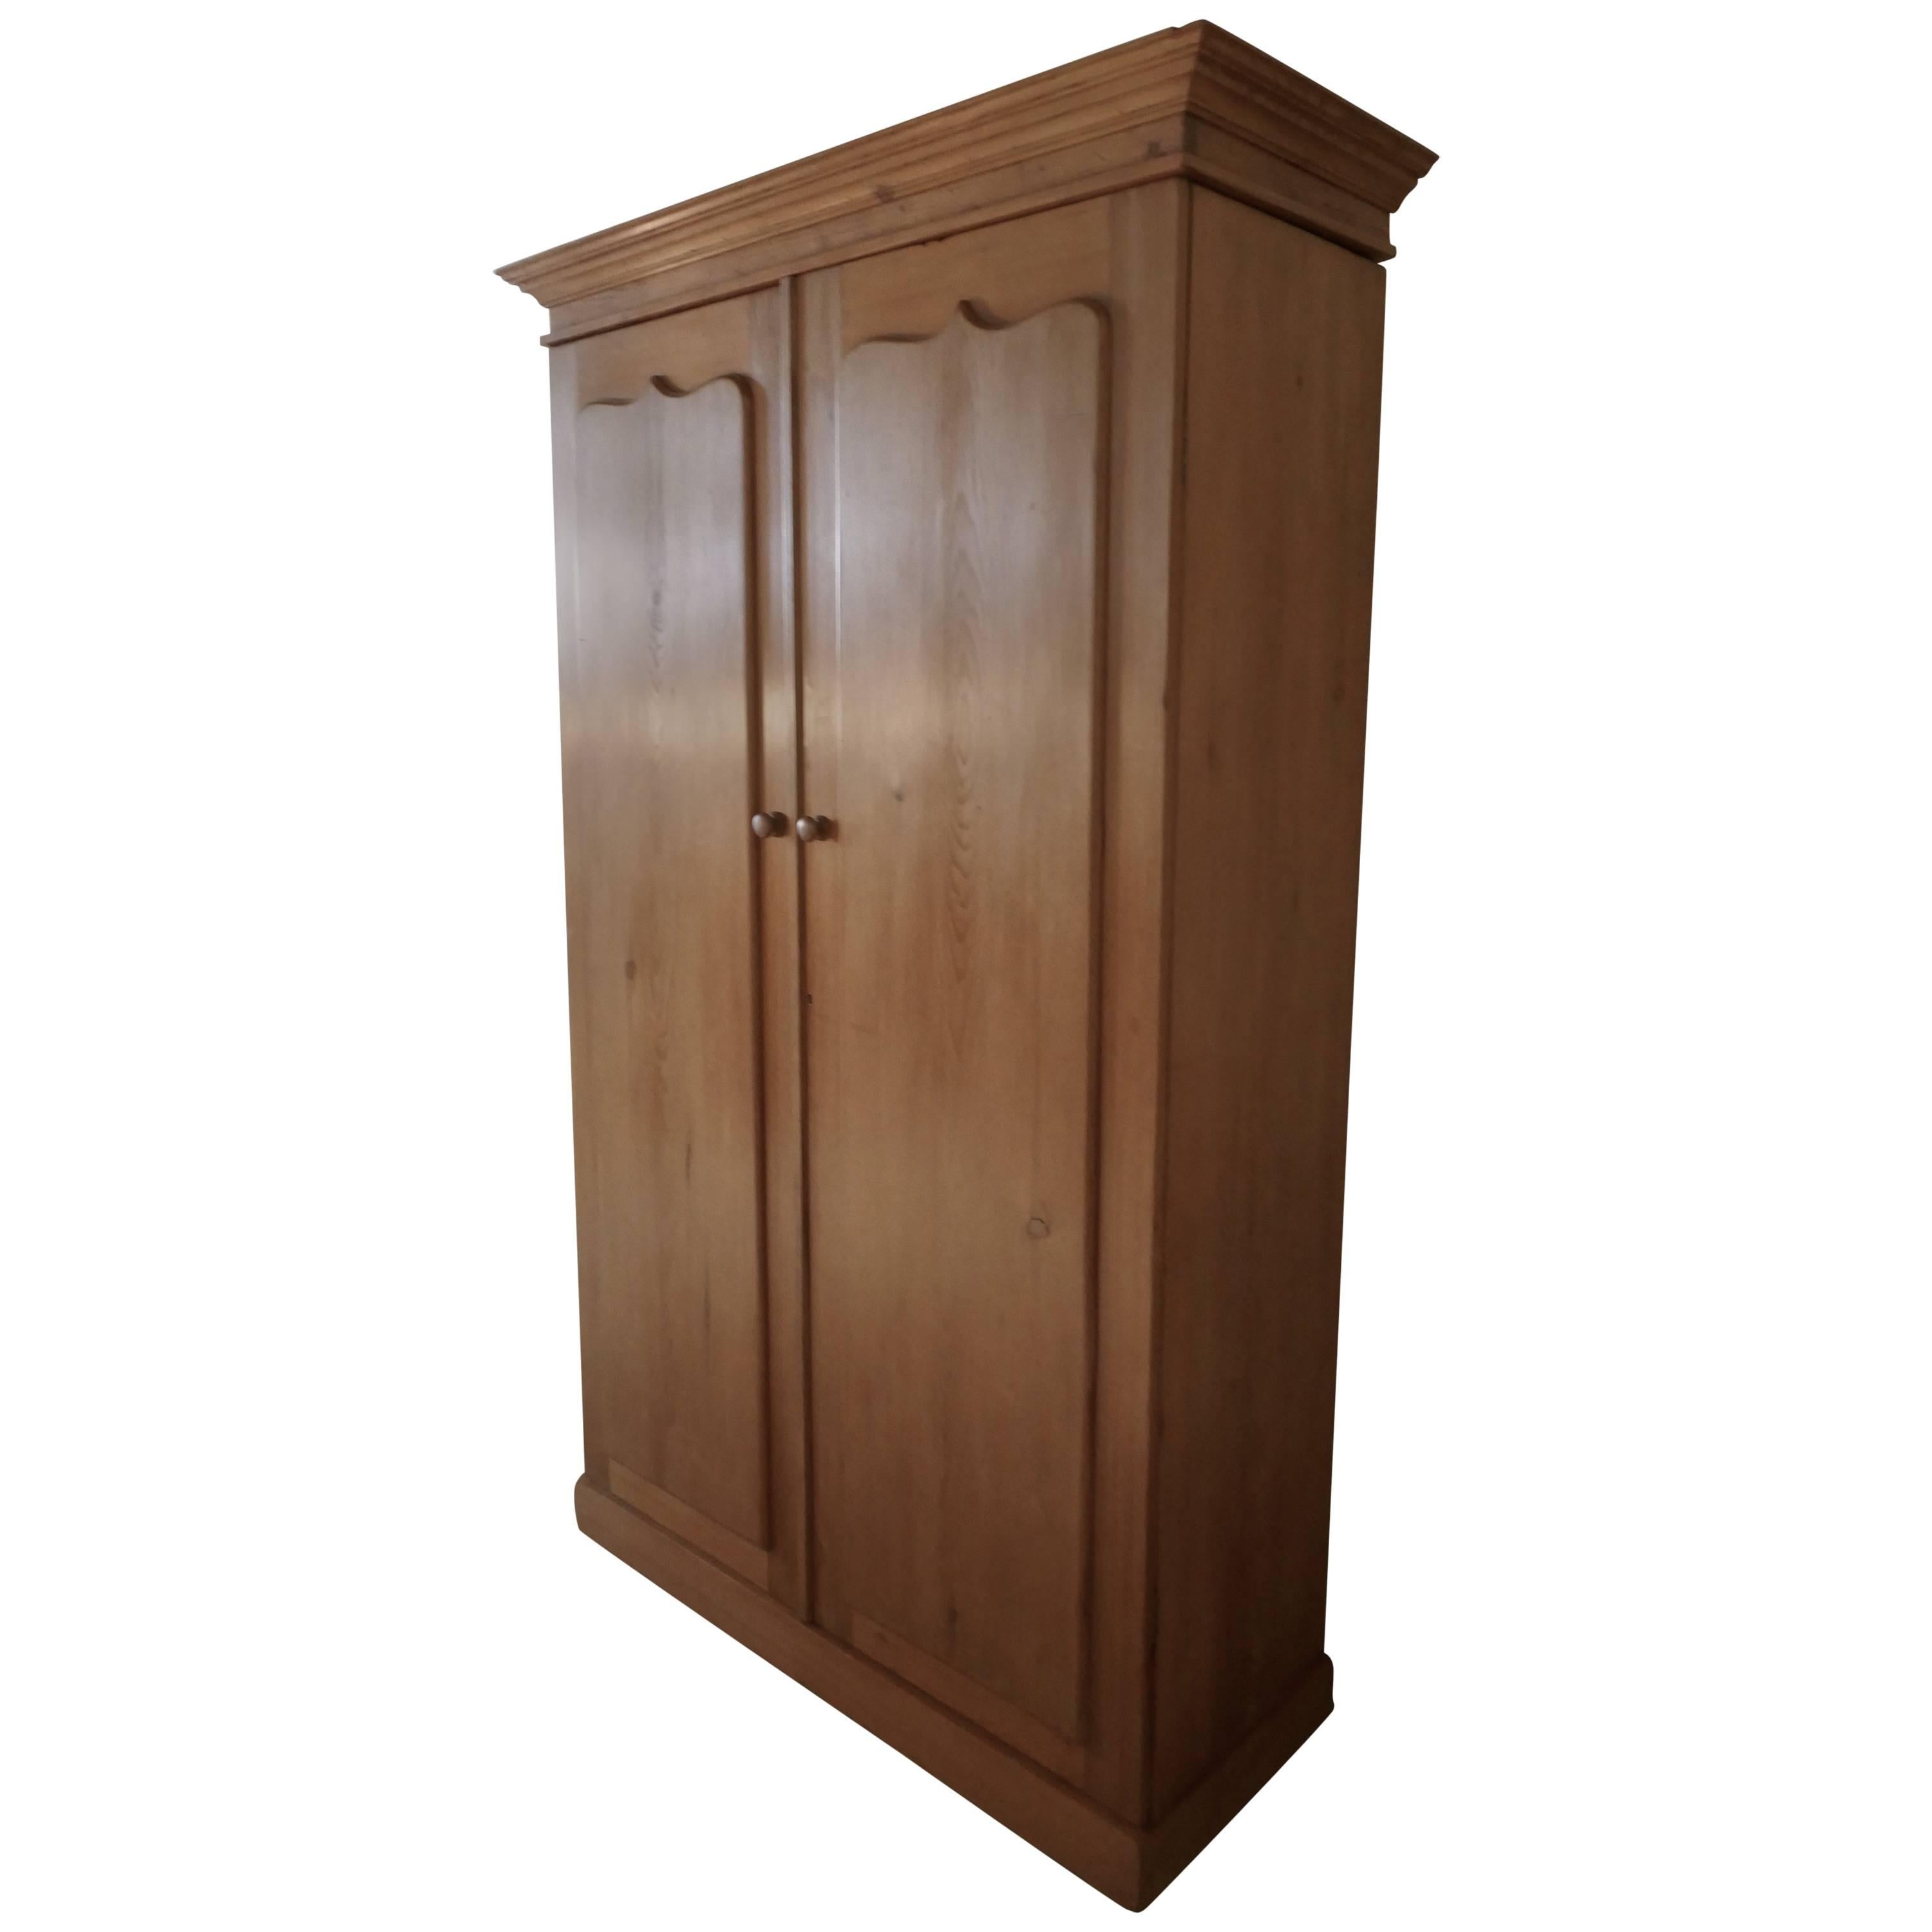 Early Victorian Stripped Pine Wardrobe